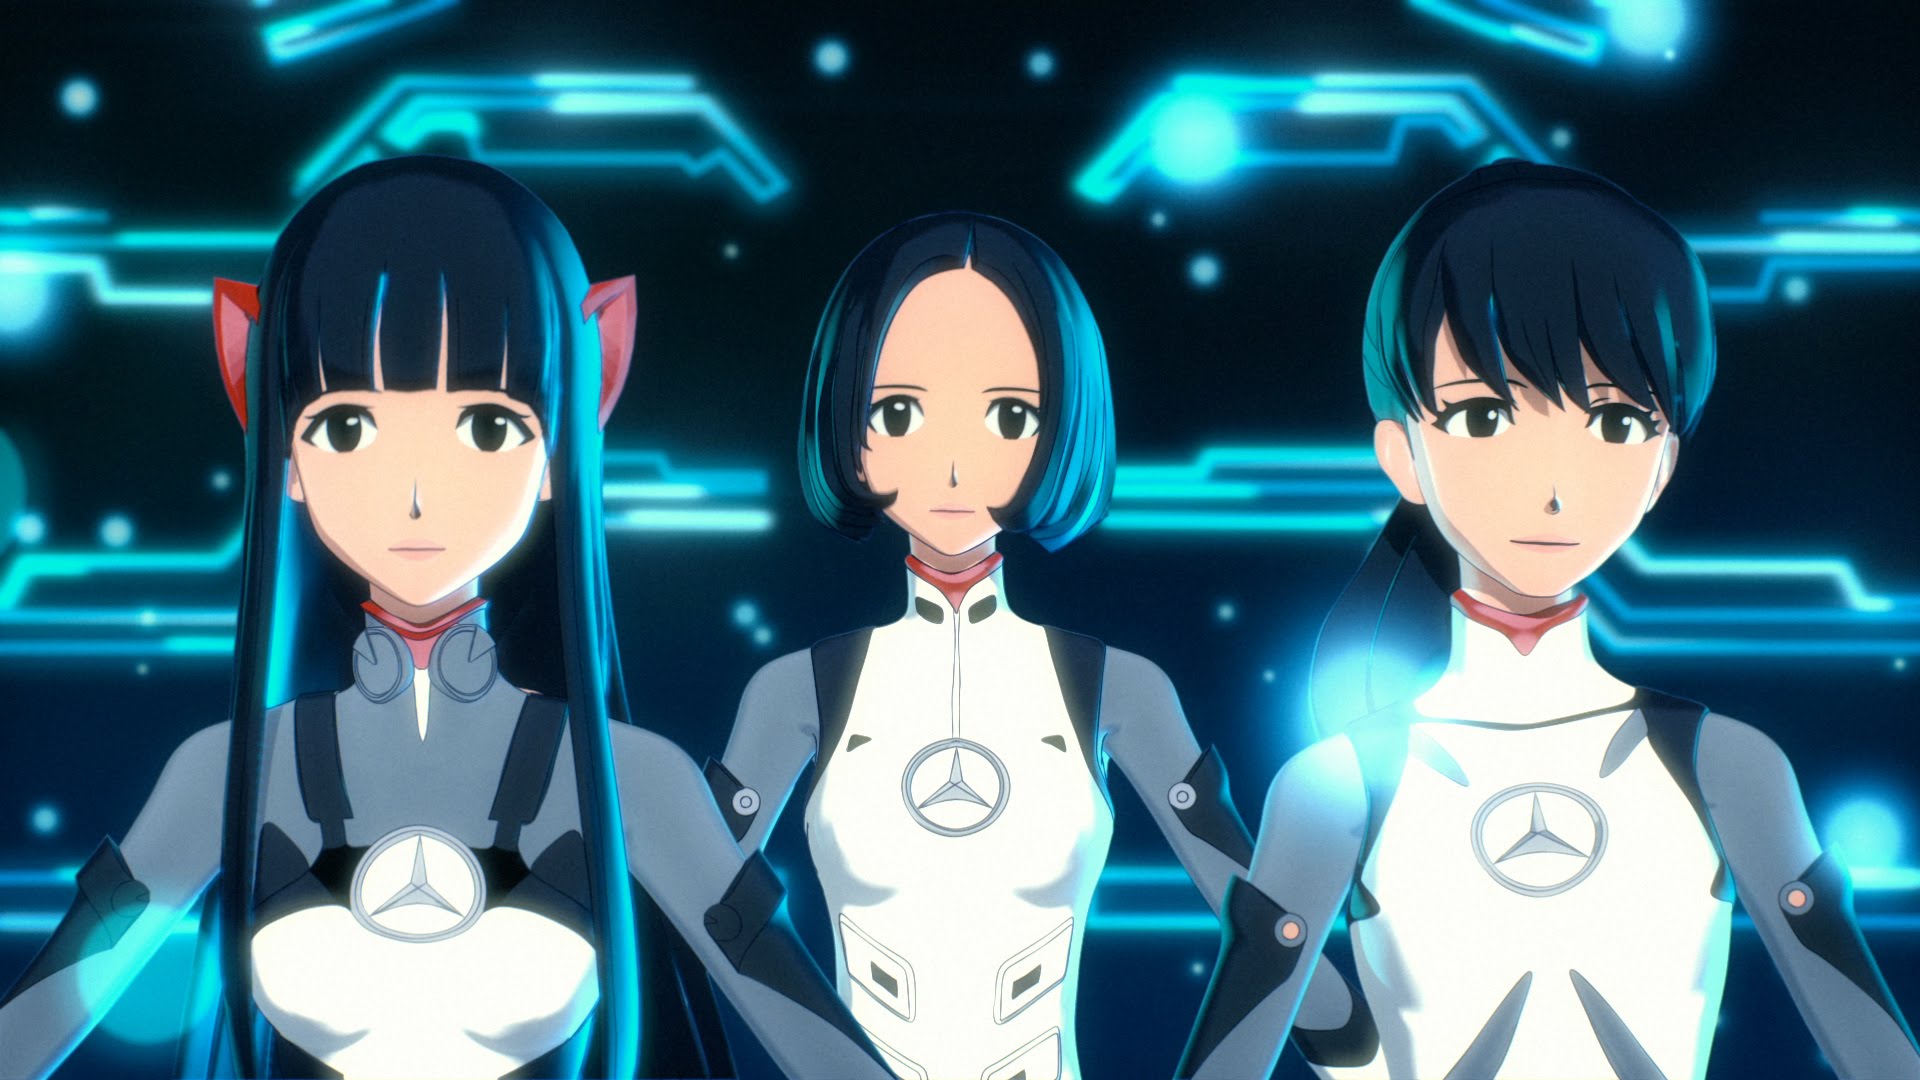 Perfume Ascends to the “Next Stage with YOU” in Mercedes-Benz A-Class Commercial!